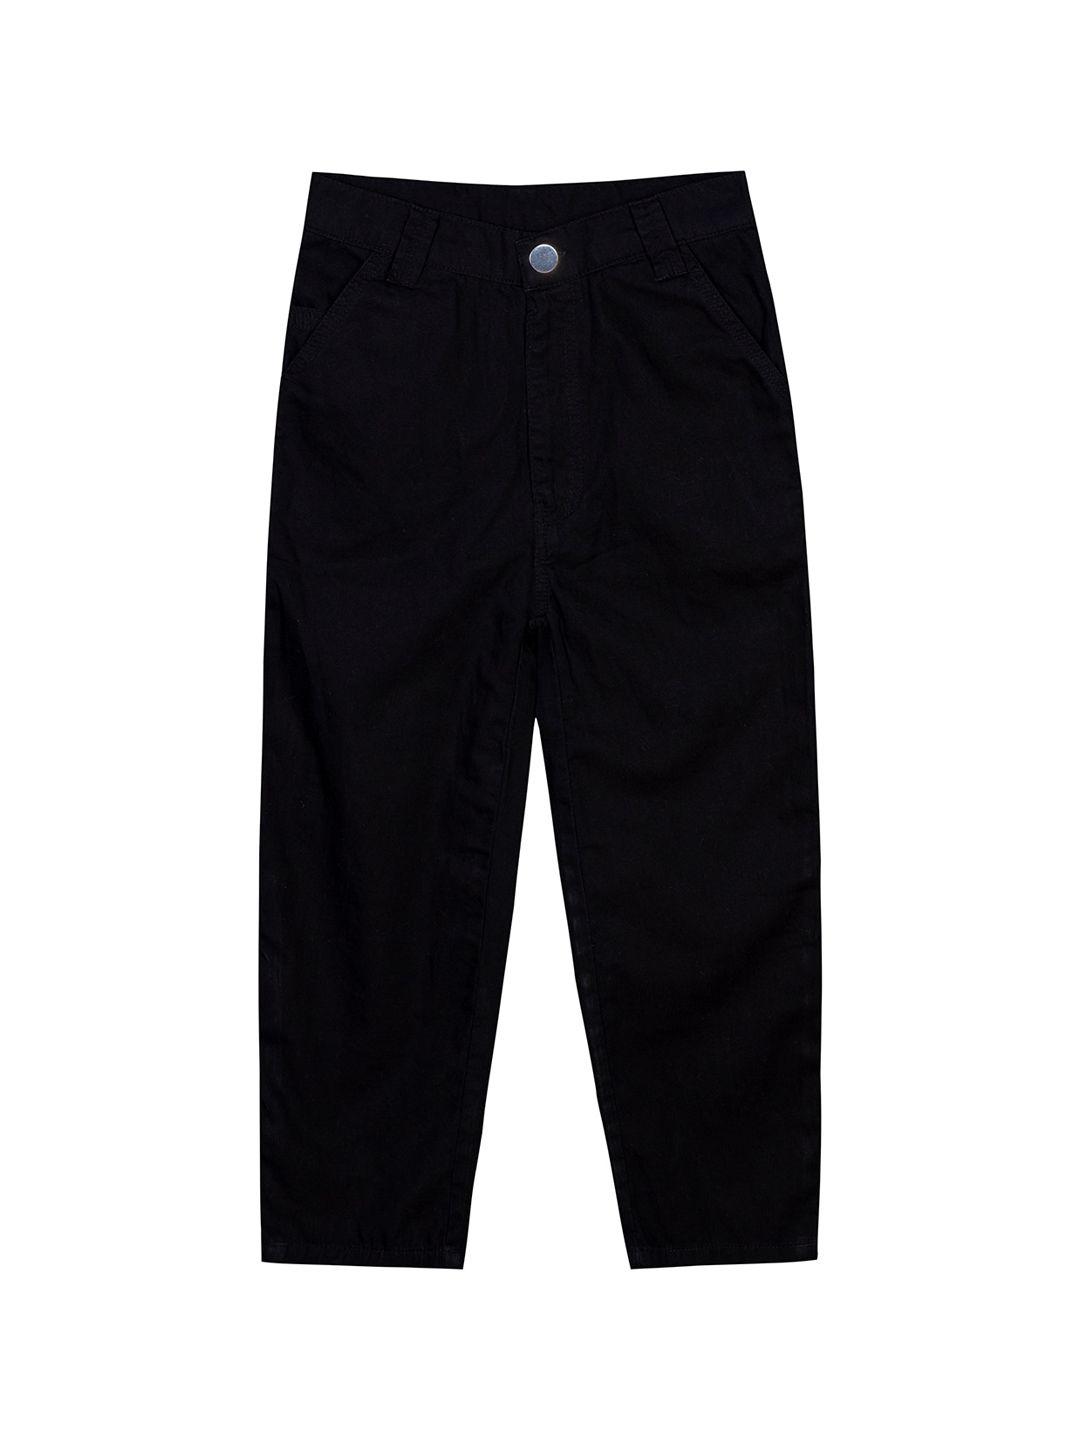 budding-bees-boys-black-relaxed-chinos-trousers